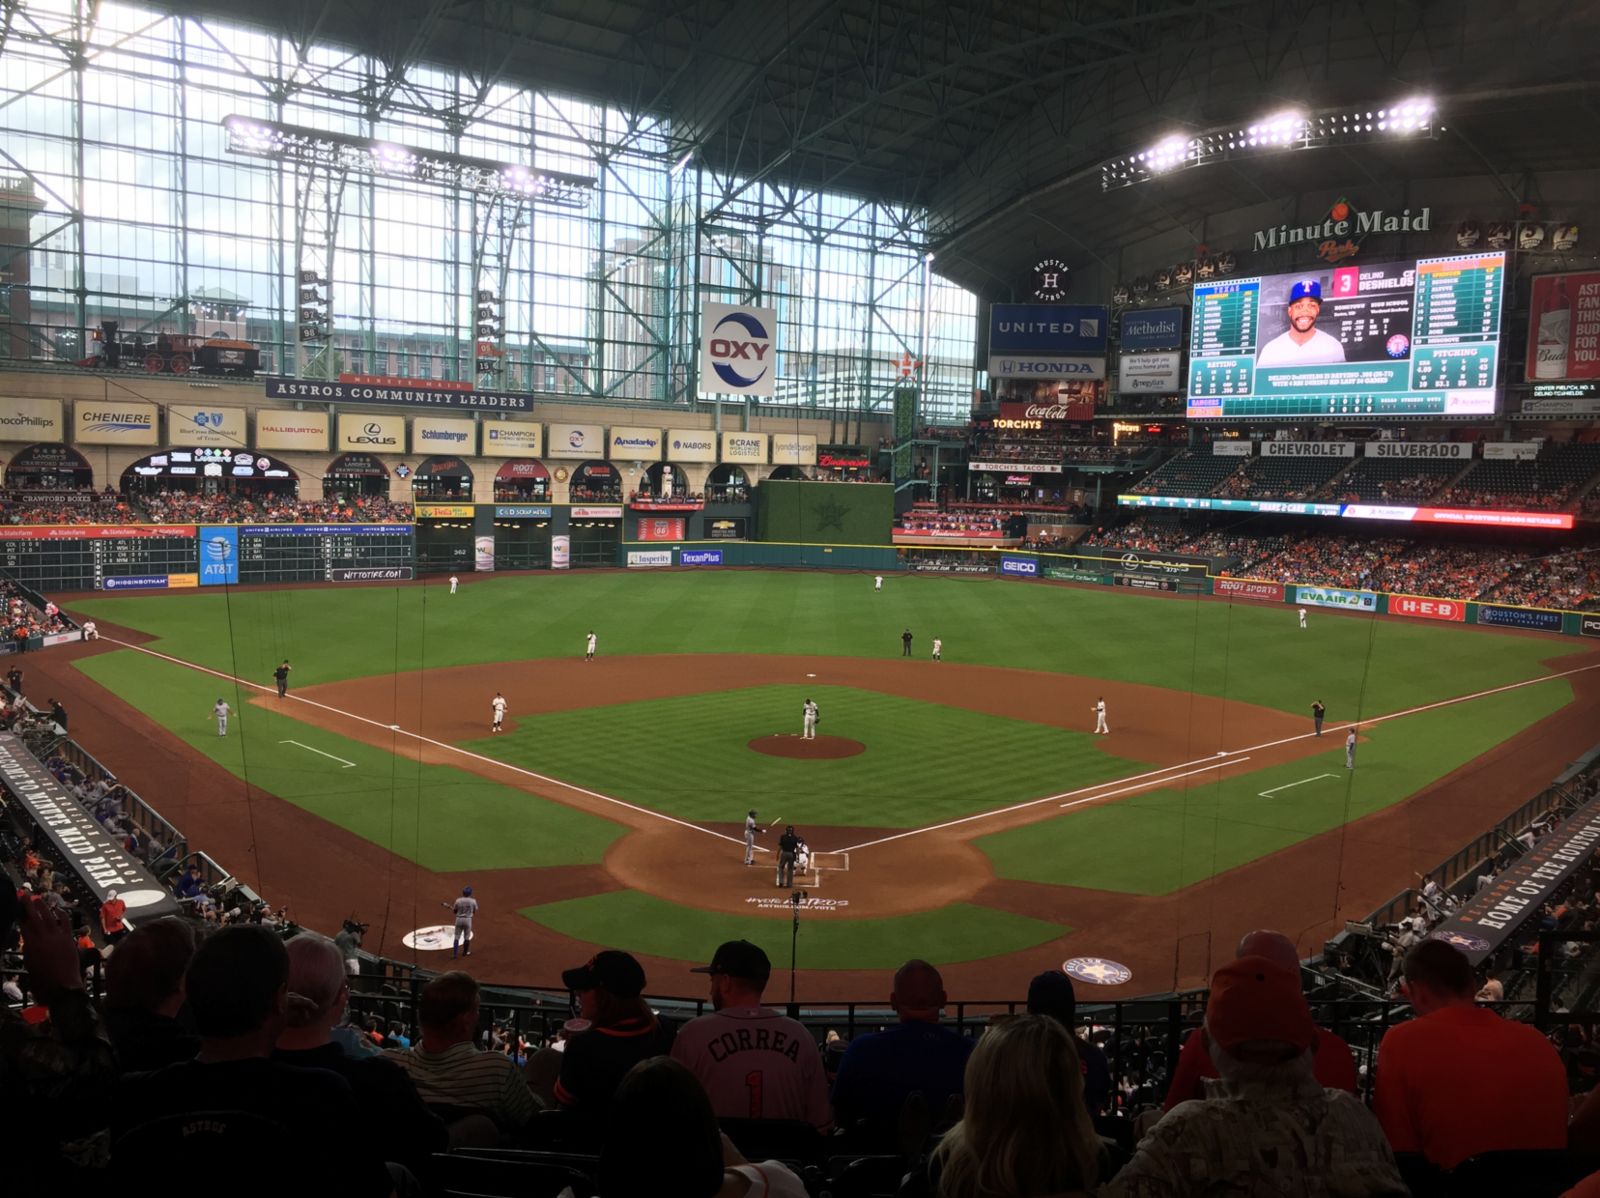 section 219, row 6 seat view  for baseball - minute maid park